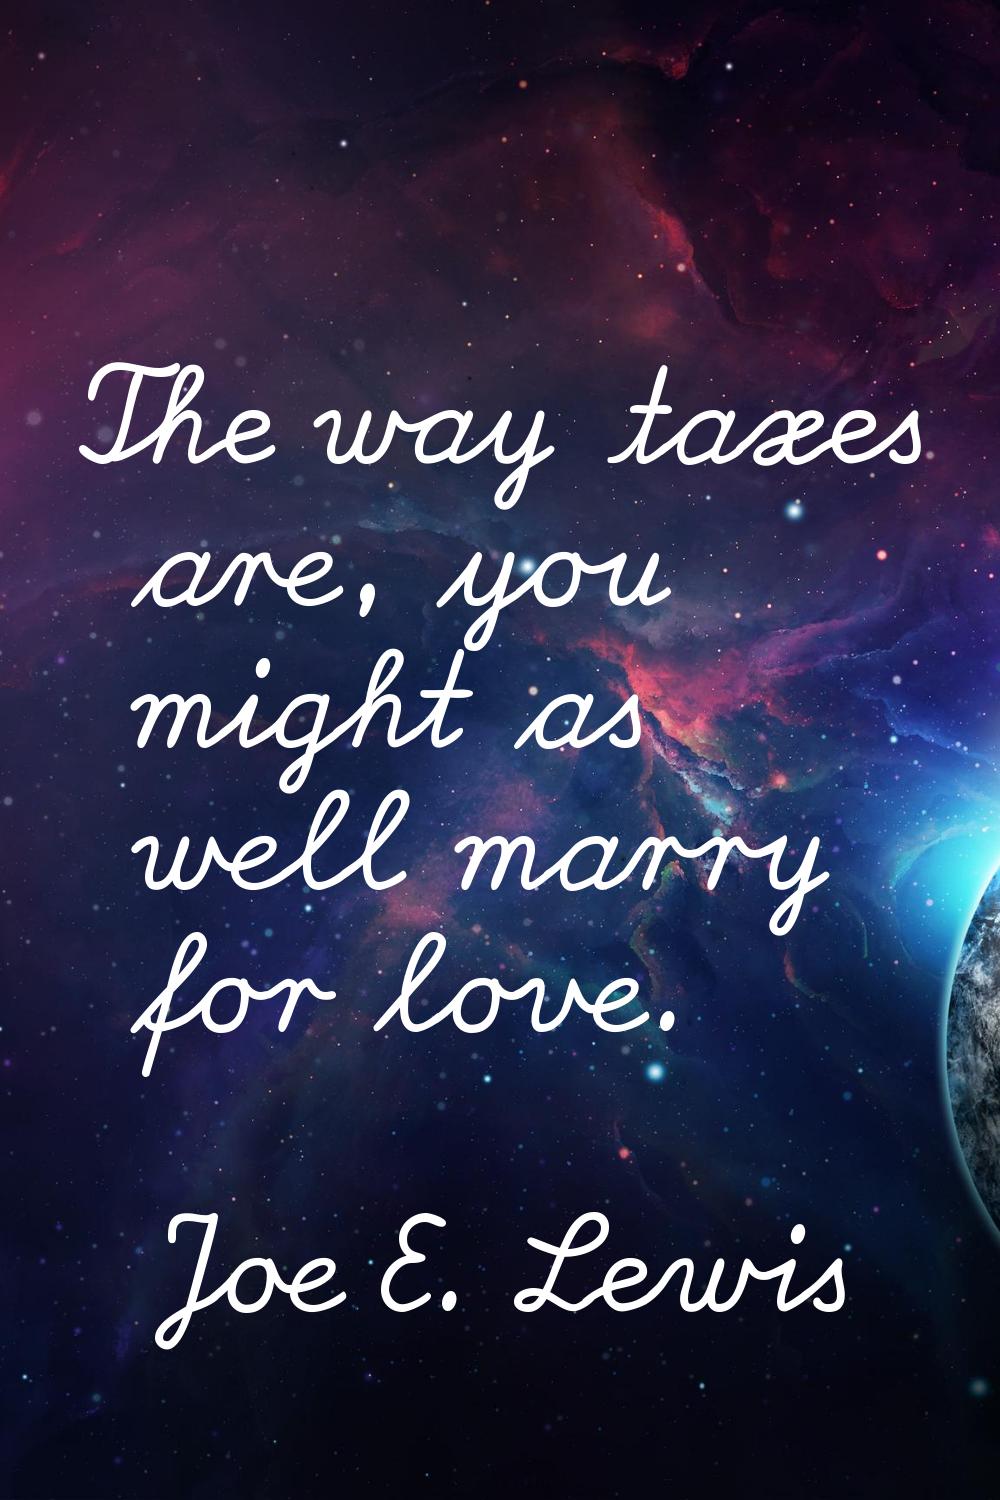 The way taxes are, you might as well marry for love.